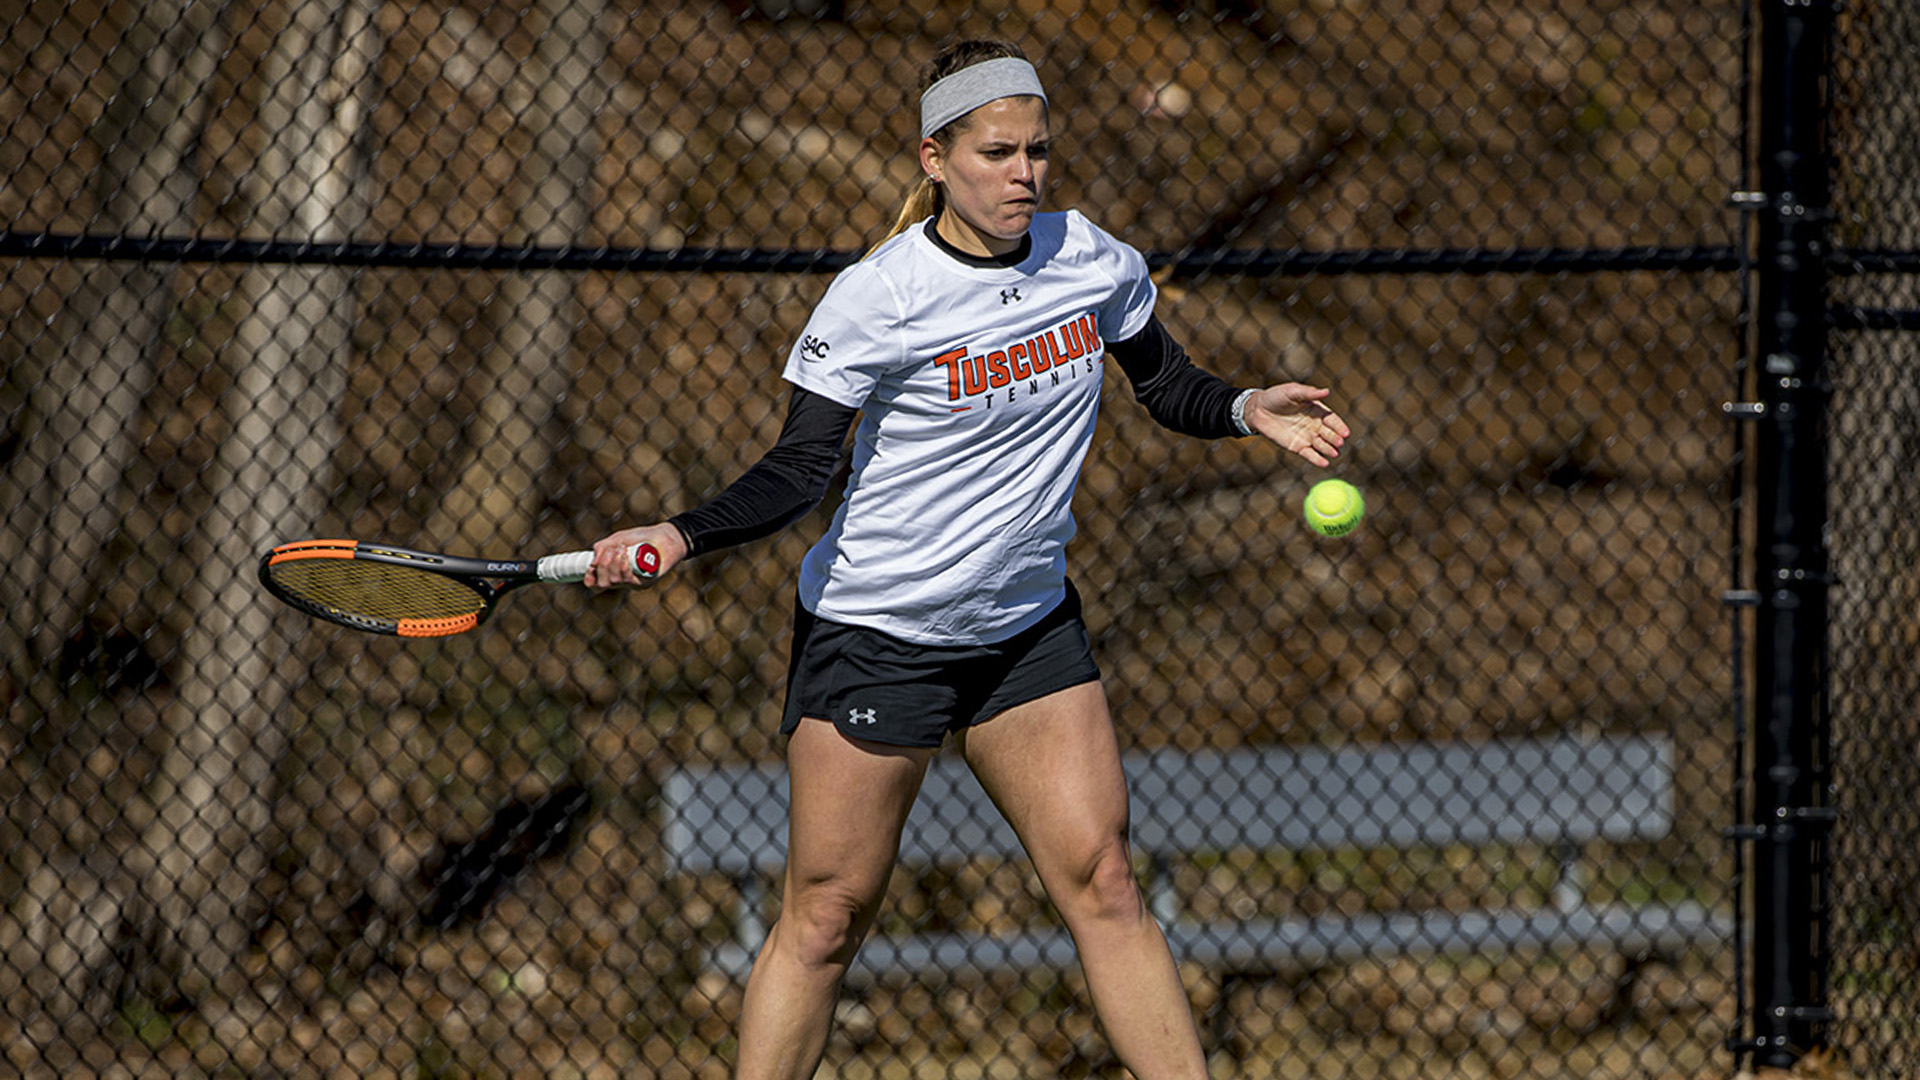 Annie McCullough reaches 100 singles wins as Pioneers shut out Belmont Abbey